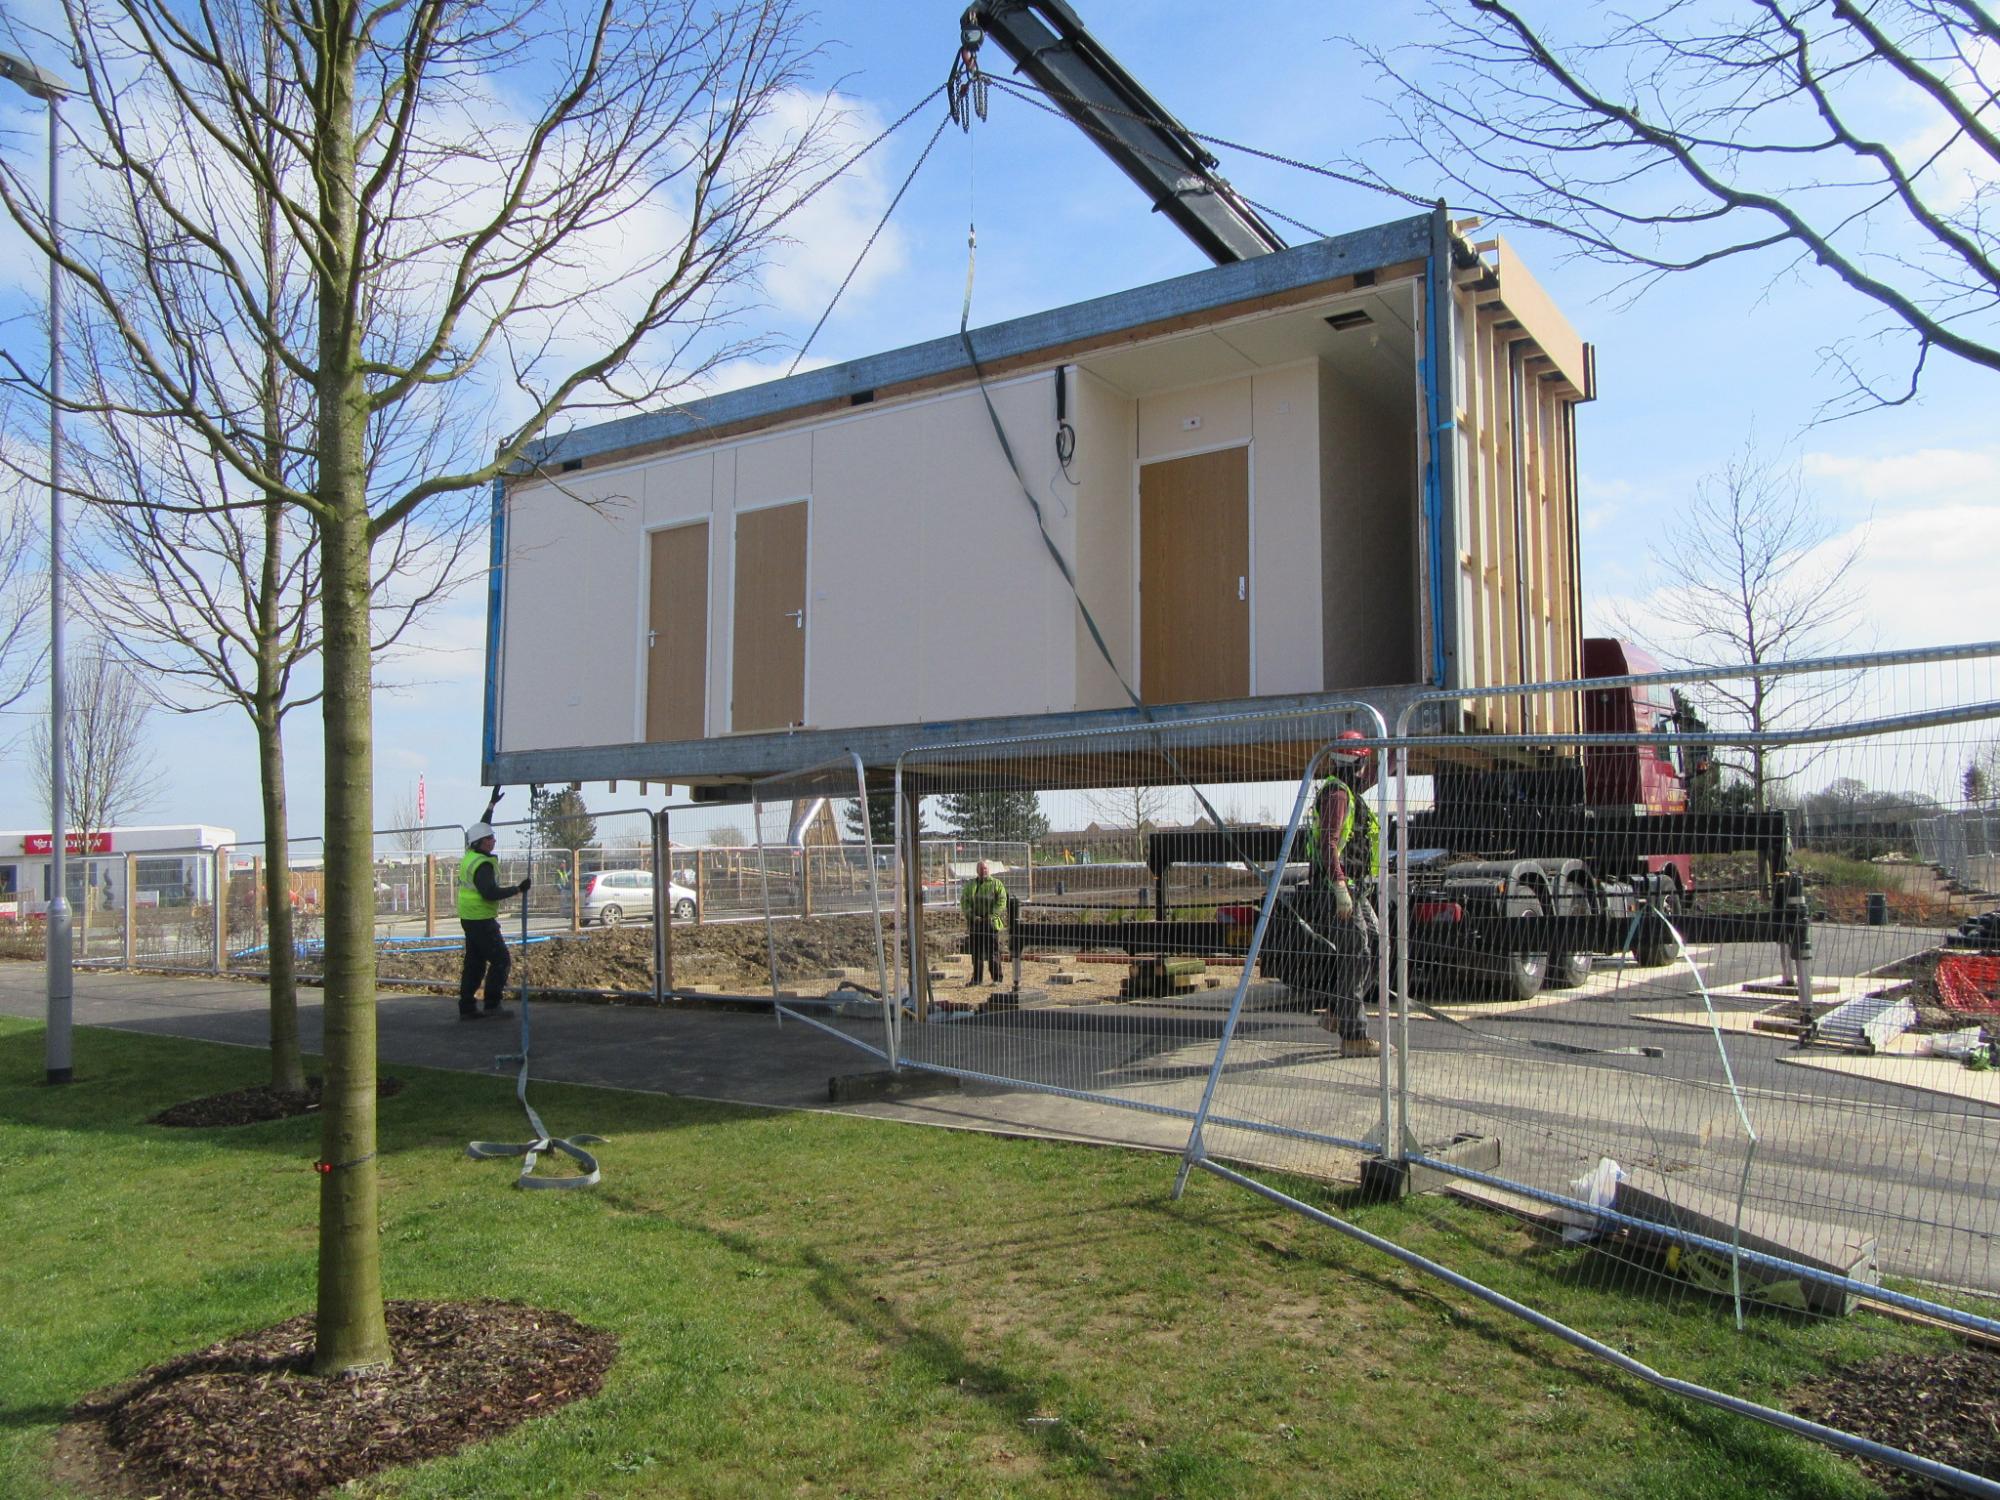 Modular community shop being craned in